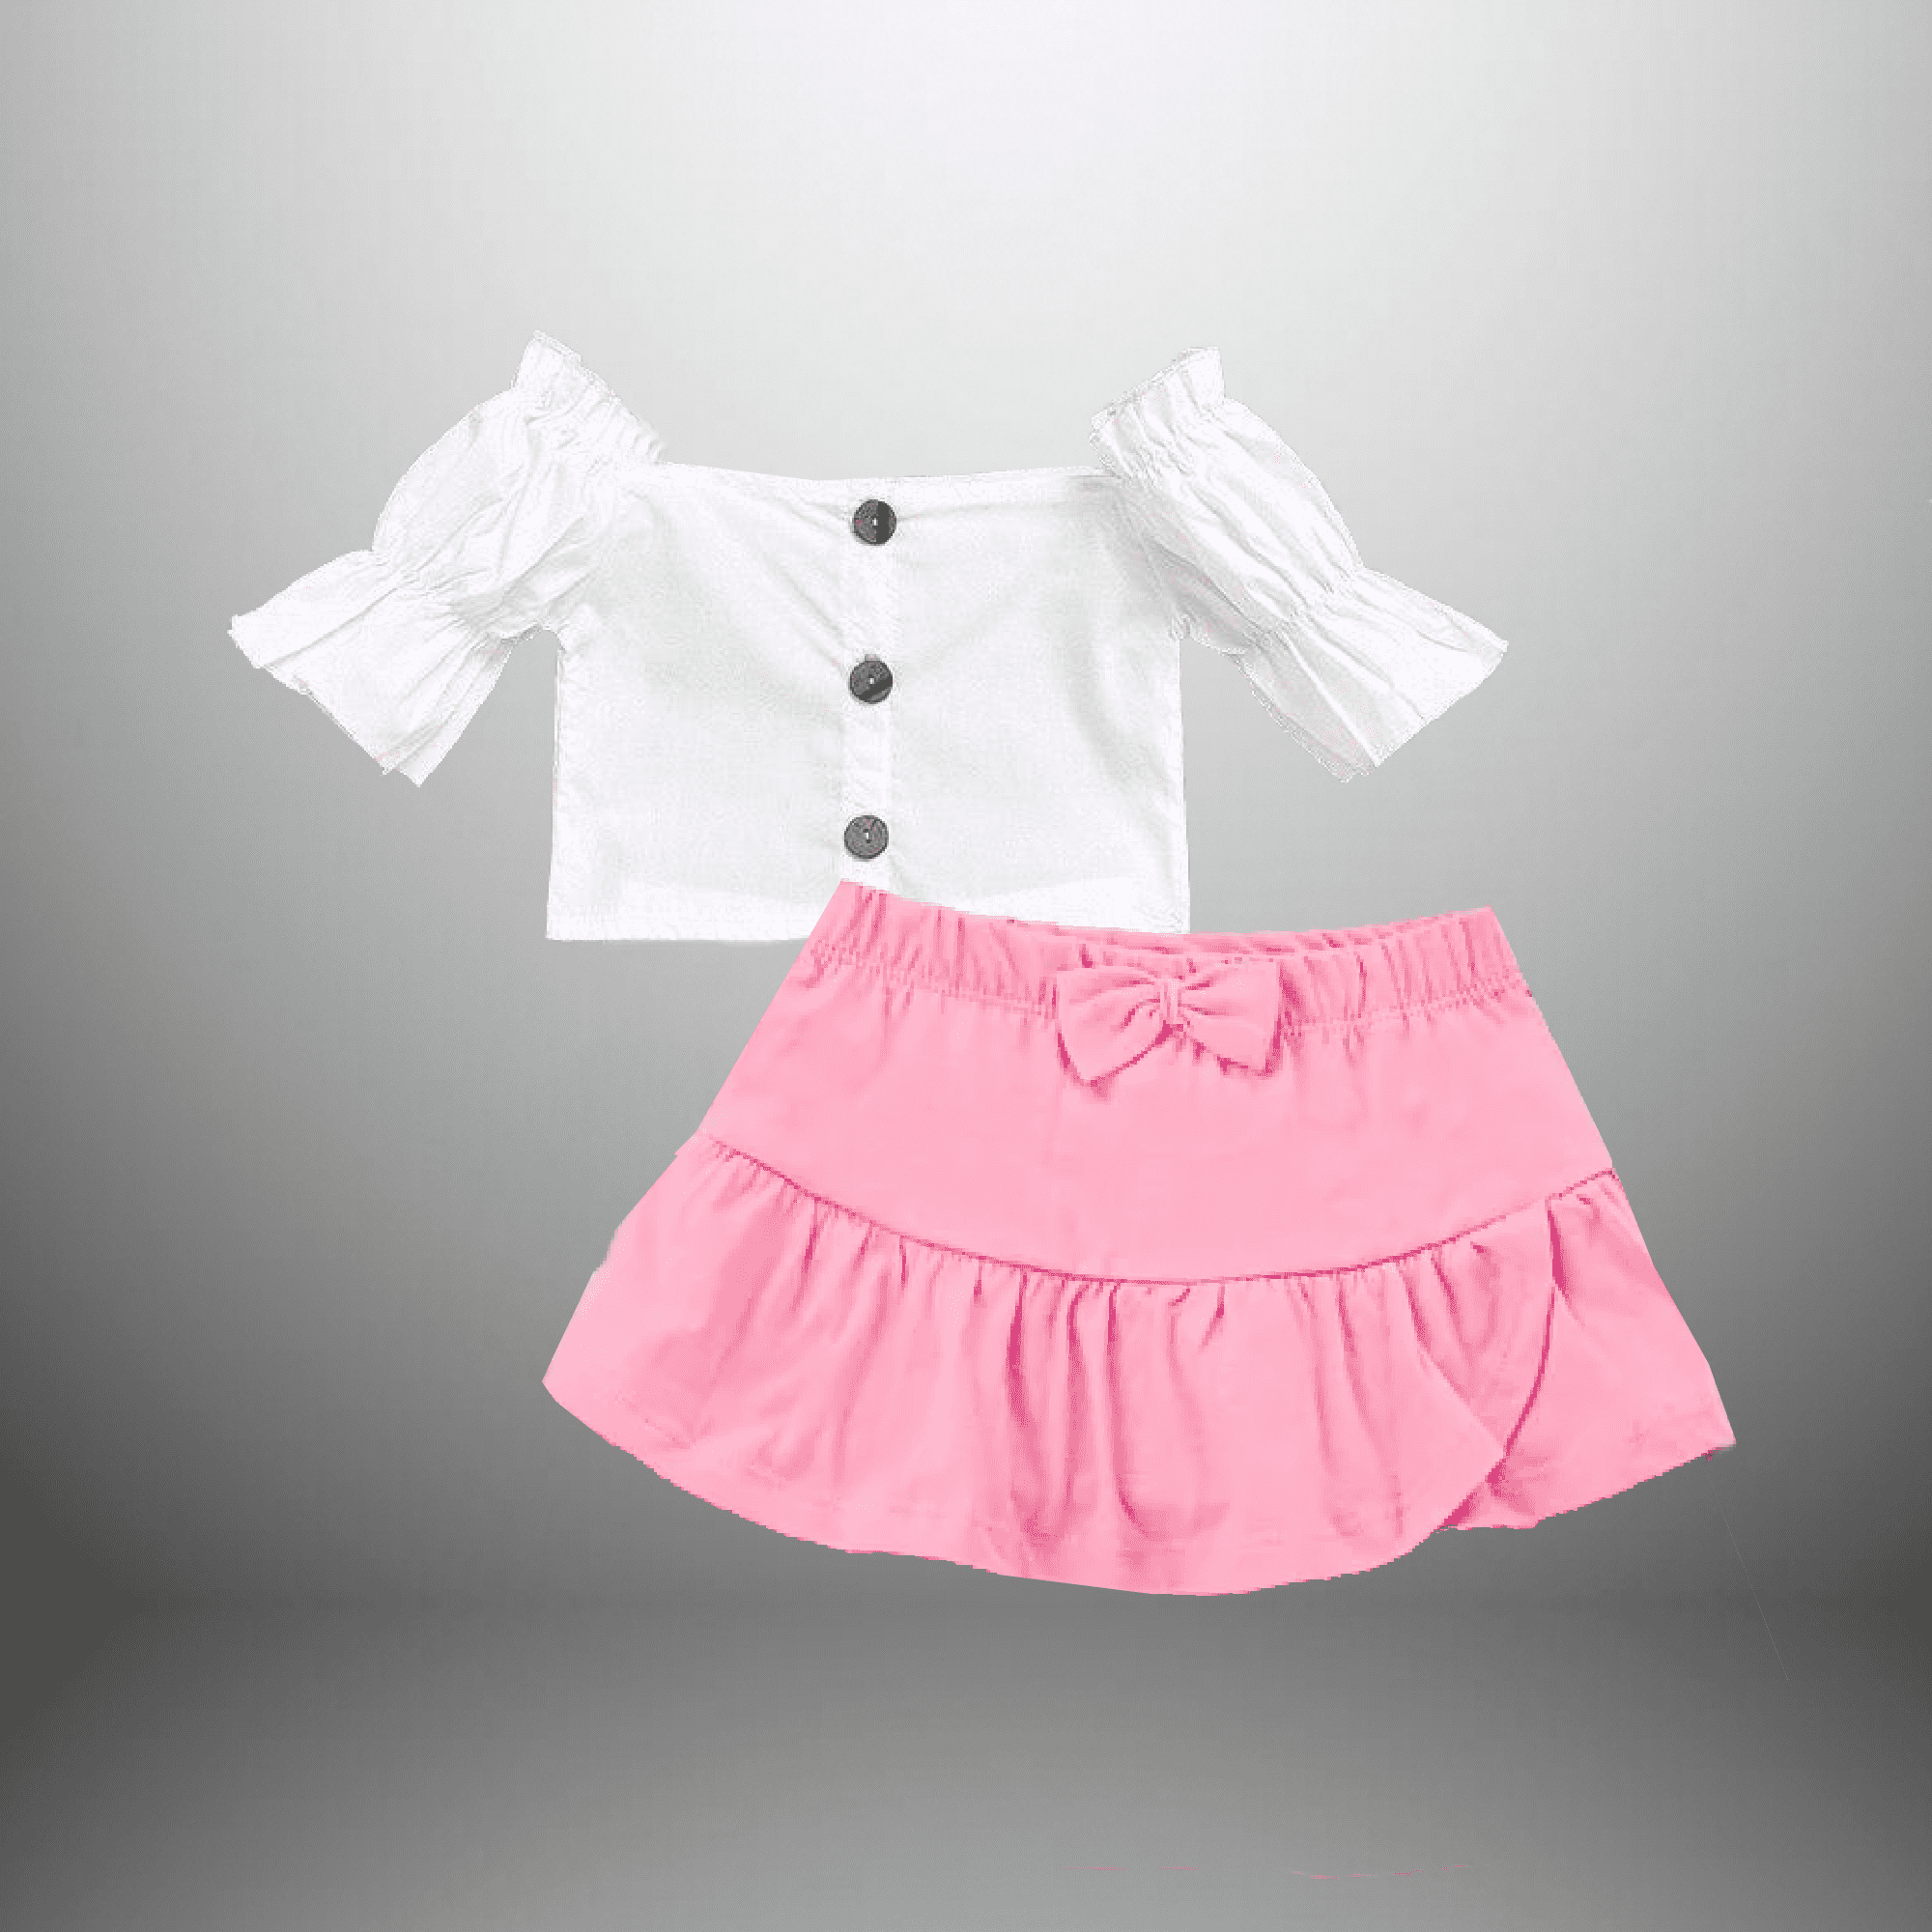 white top and skirt with frills-RKFCW102